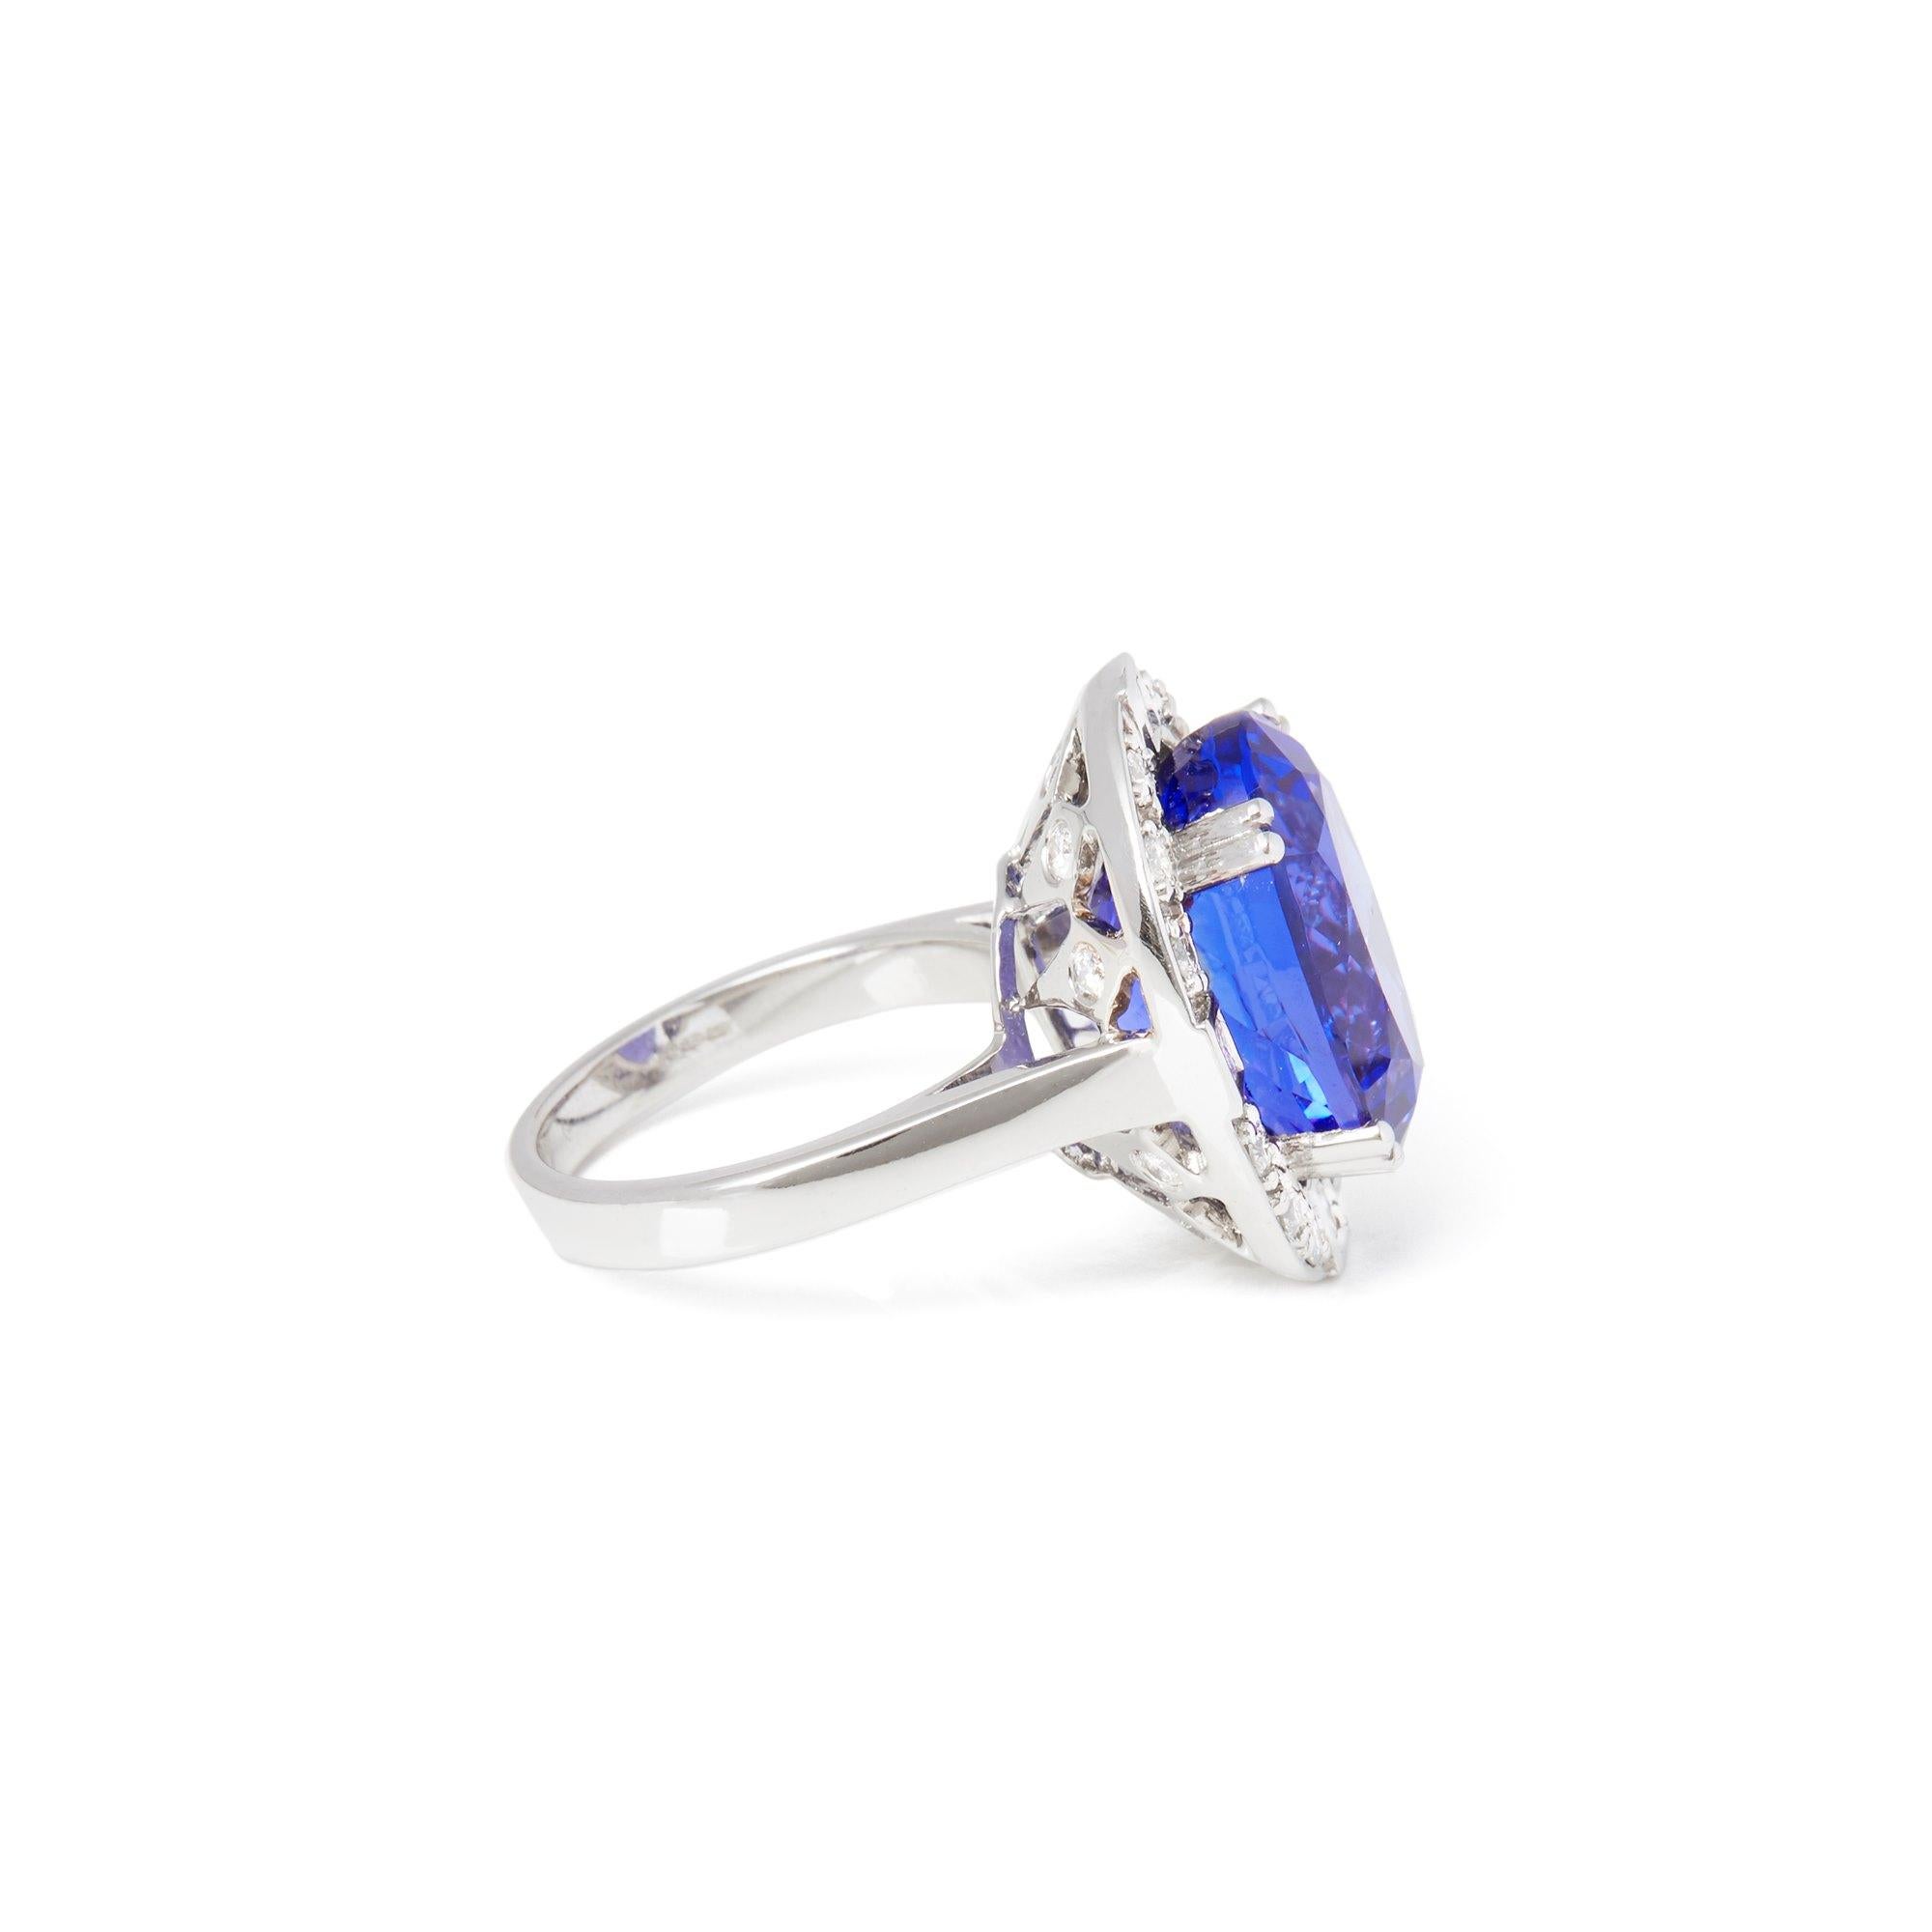 This ring designed by David Jerome is from his private collection and features one oval cut Tanzanite totalling 14.35cts sourced from the D block mine in Tanzania. Set with round brilliant cut Diamonds totalling 1.89cts mounted in an 18k white gold